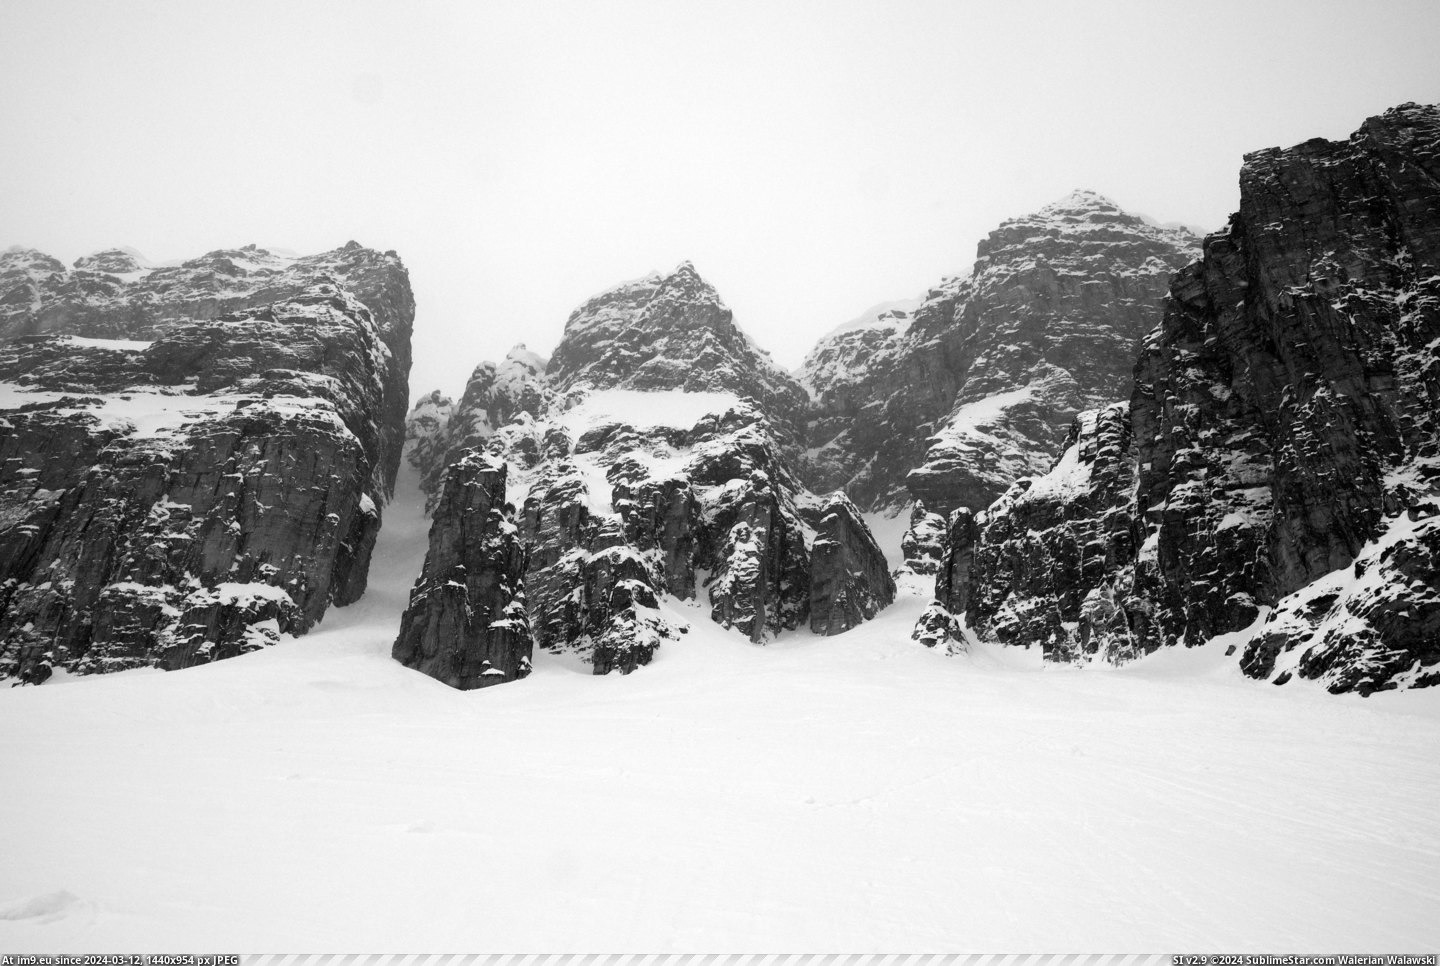 #Black #Photos #Daddy #Case #Rarely #White #Grand [Earthporn] I rarely see black and white photos here, but in this case I think it's appropriate. The Grand Daddy Couloir in Banf Pic. (Image of album My r/EARTHPORN favs))